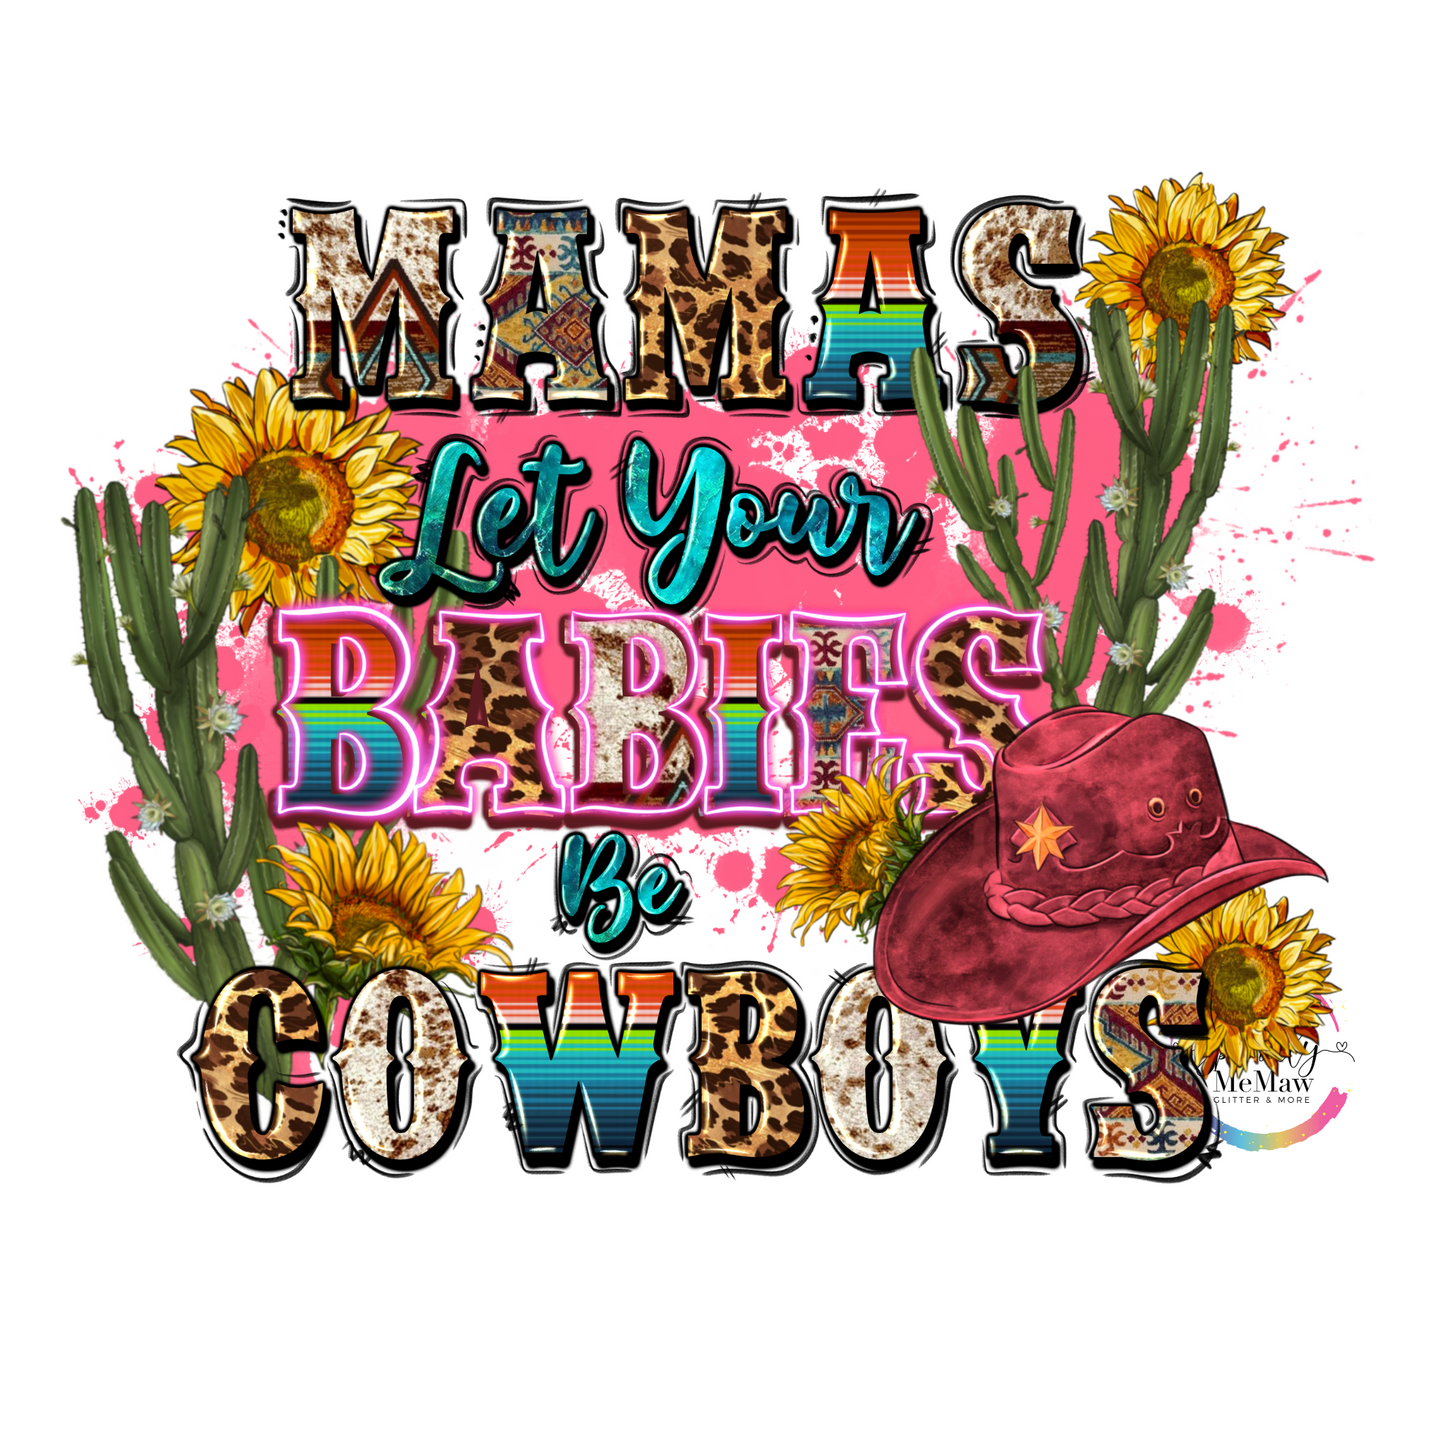 Mamas Let your Babies be cowboys Uv decal 4 x 5 inches